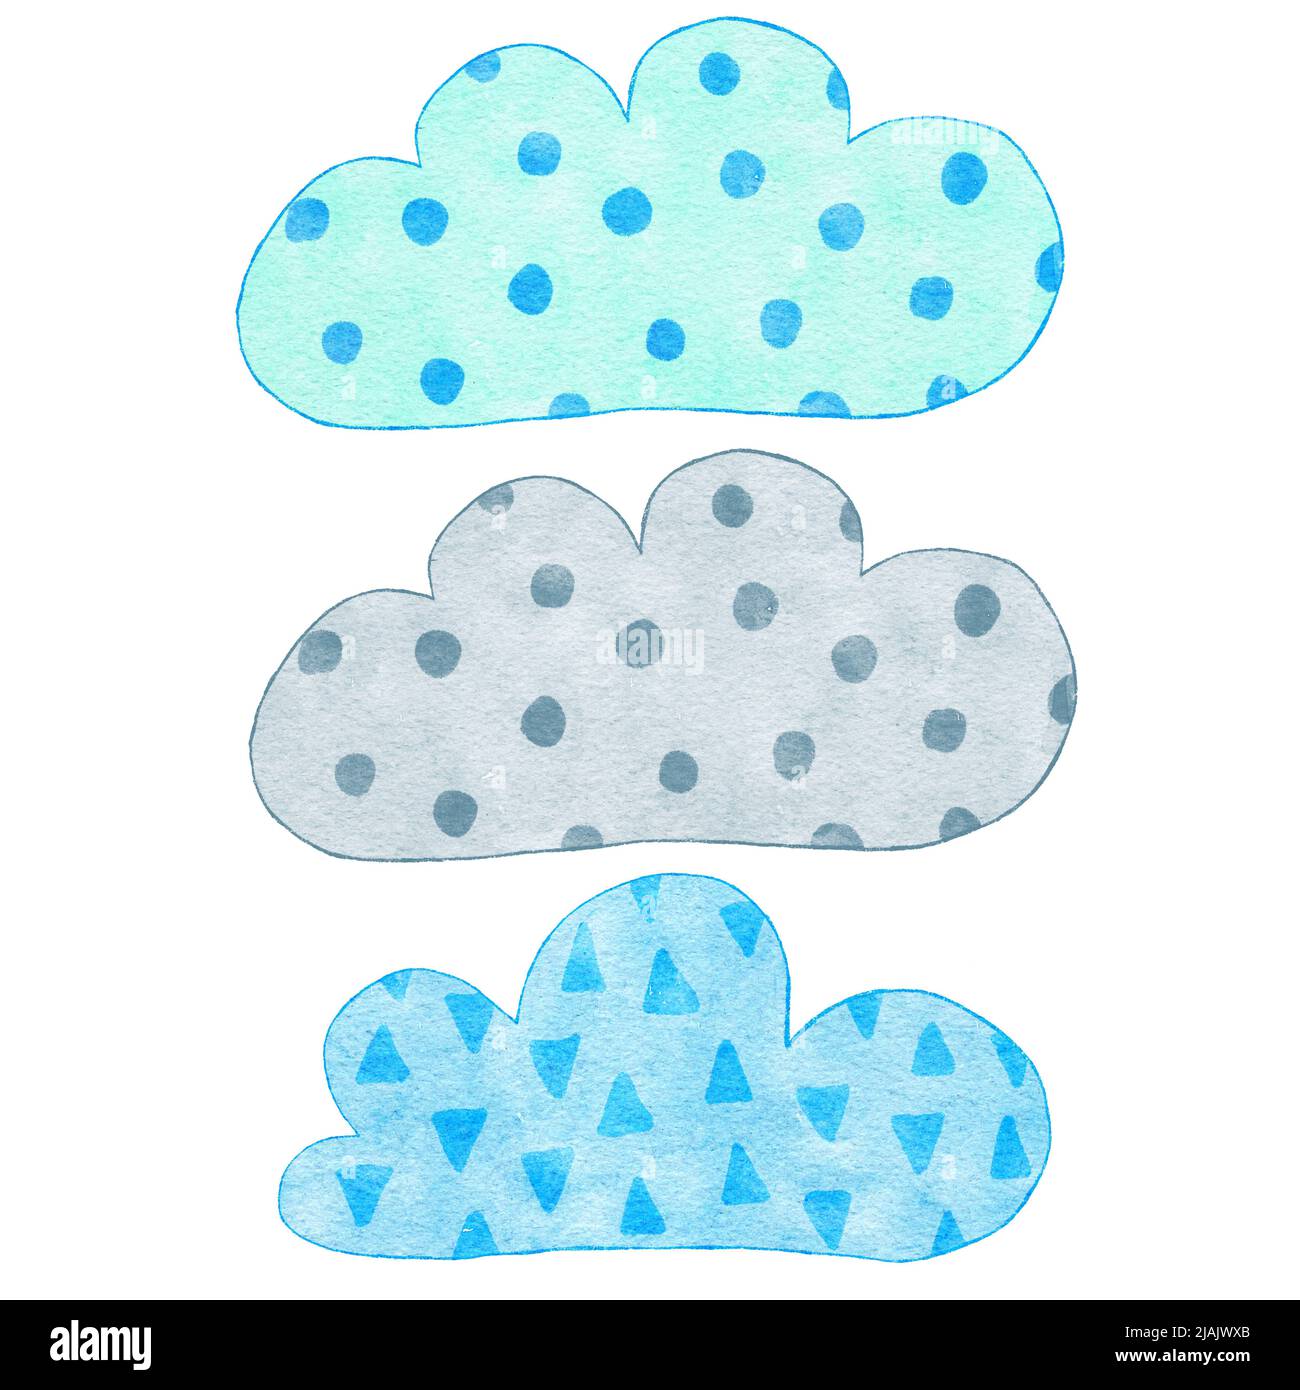 Watercolor hand drawn illustration of blue gray cute clouds. Boy baby shower design for invitations greeting party, nursery clipart is soft pastelcolors modern minimalist print for kids children Stock Photo